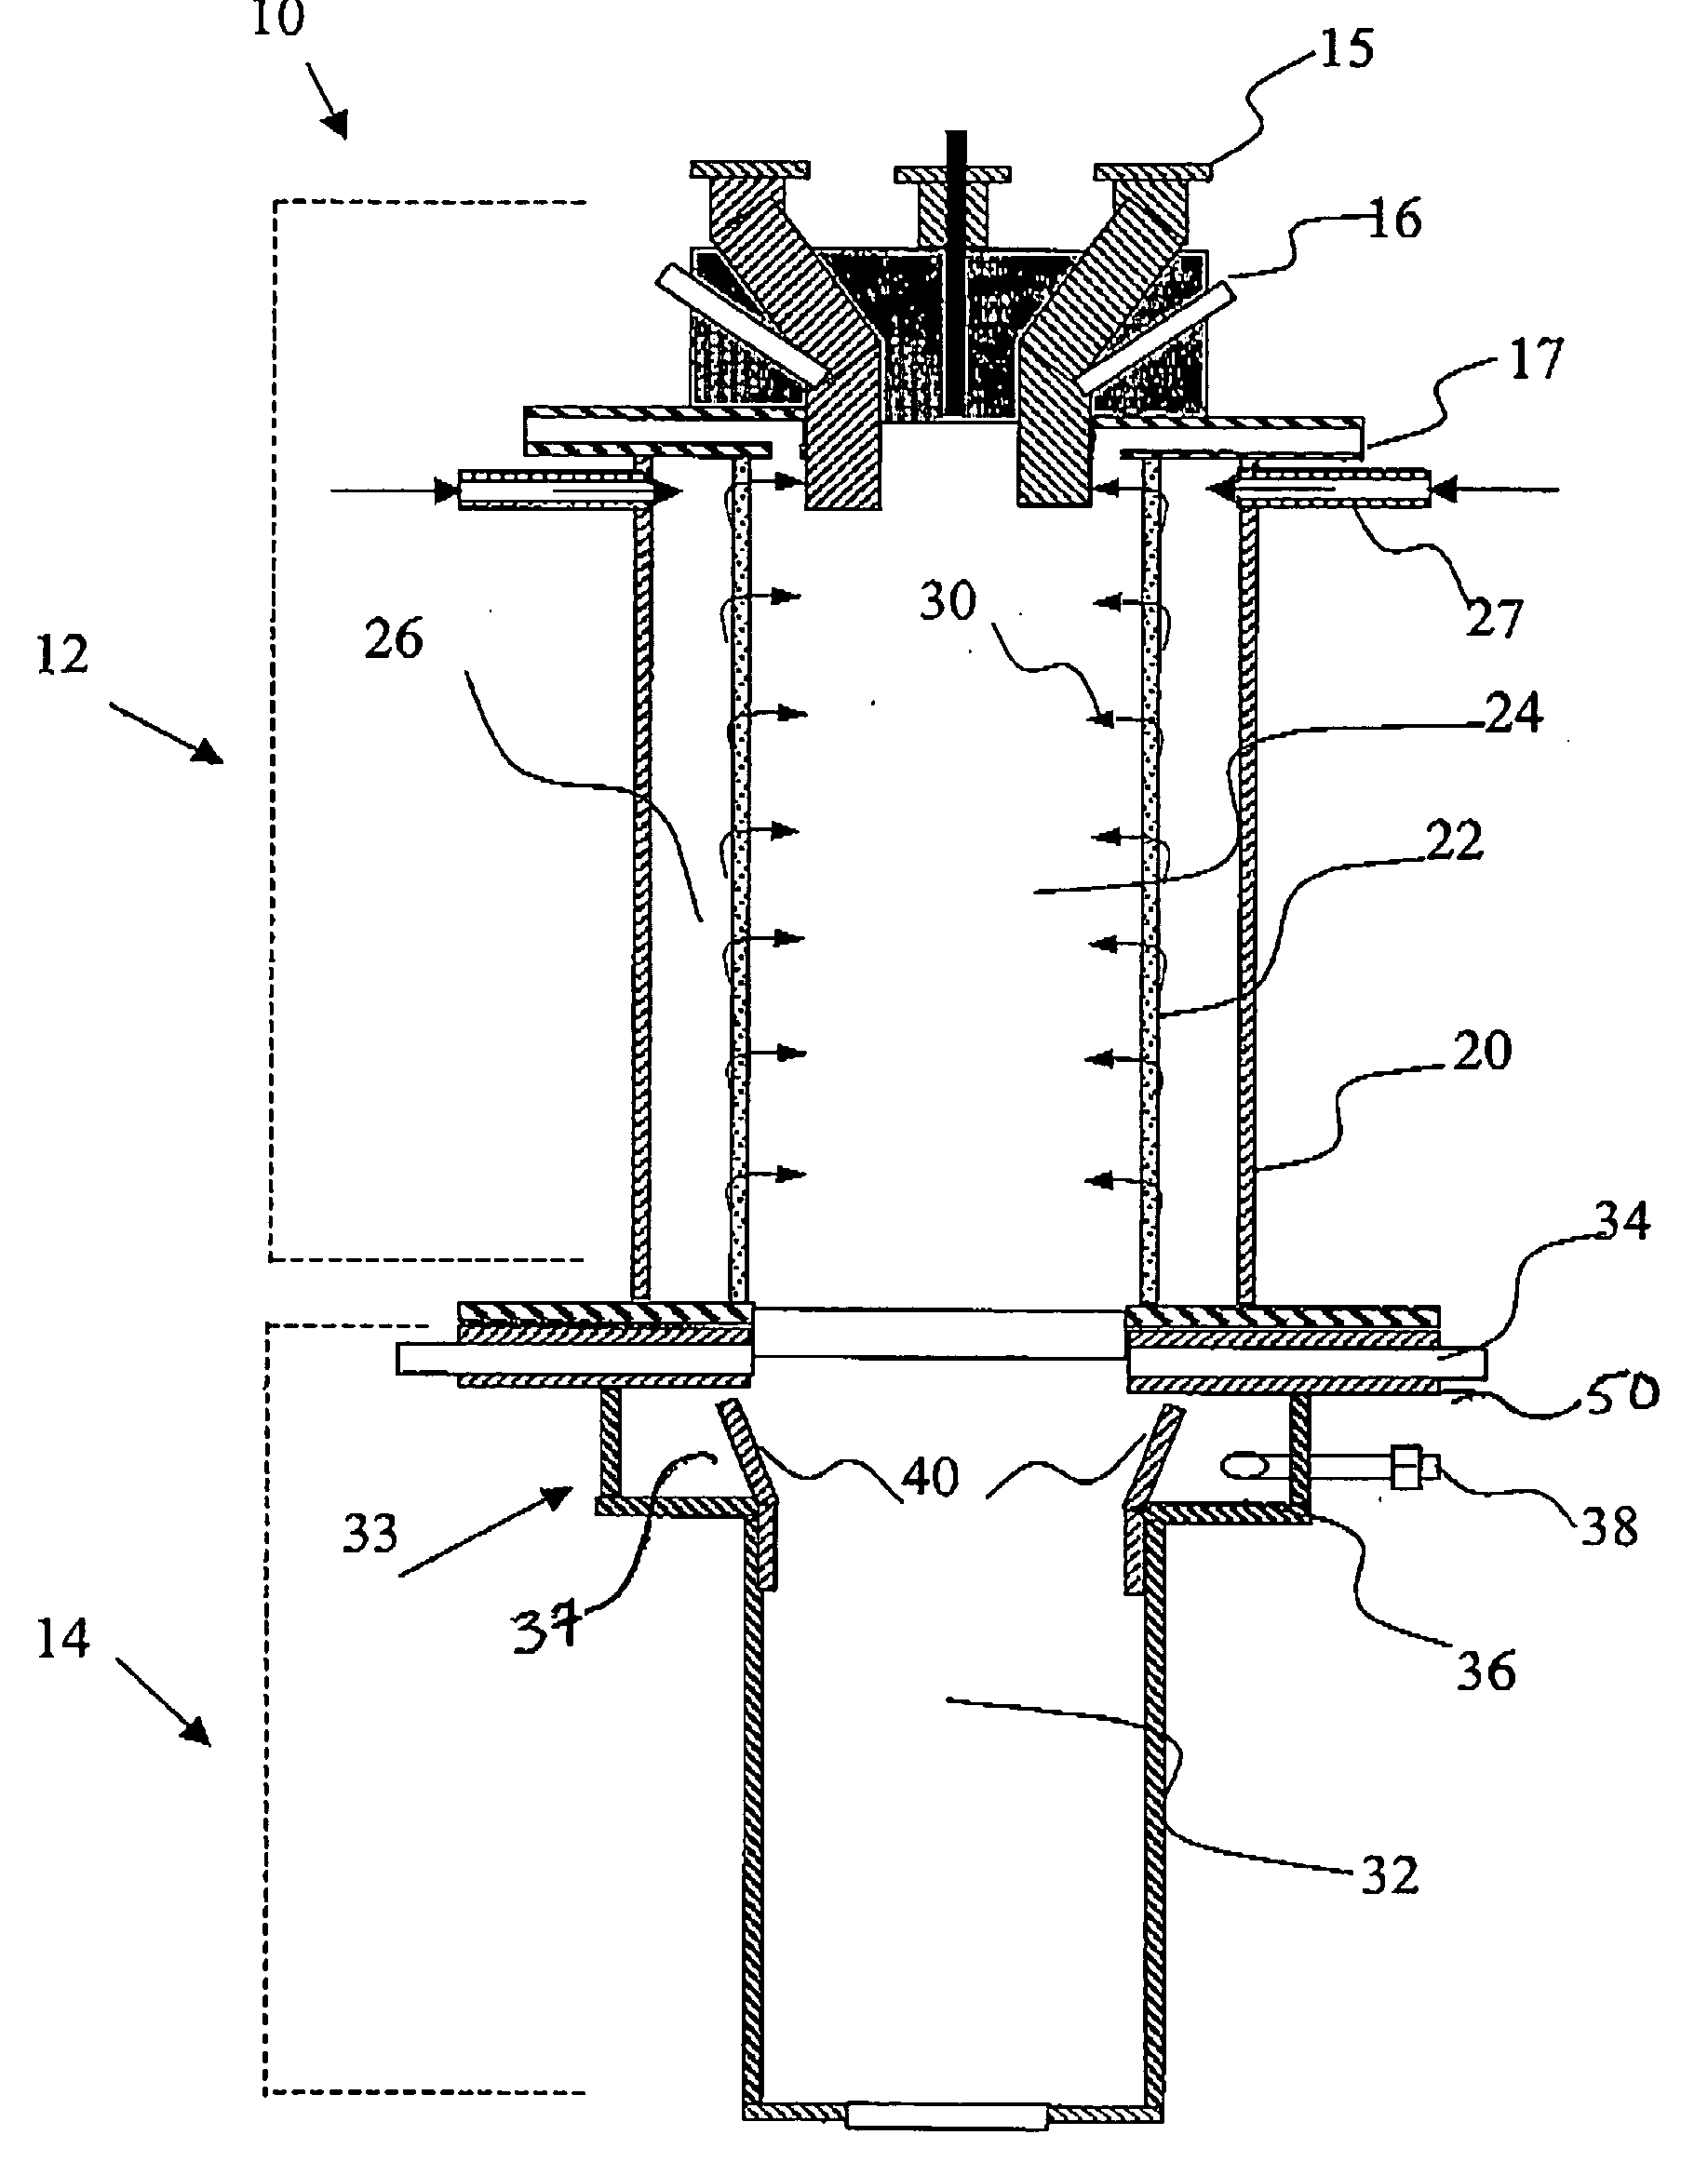 Apparatus and method for controlled combustion of gaseous pollutants